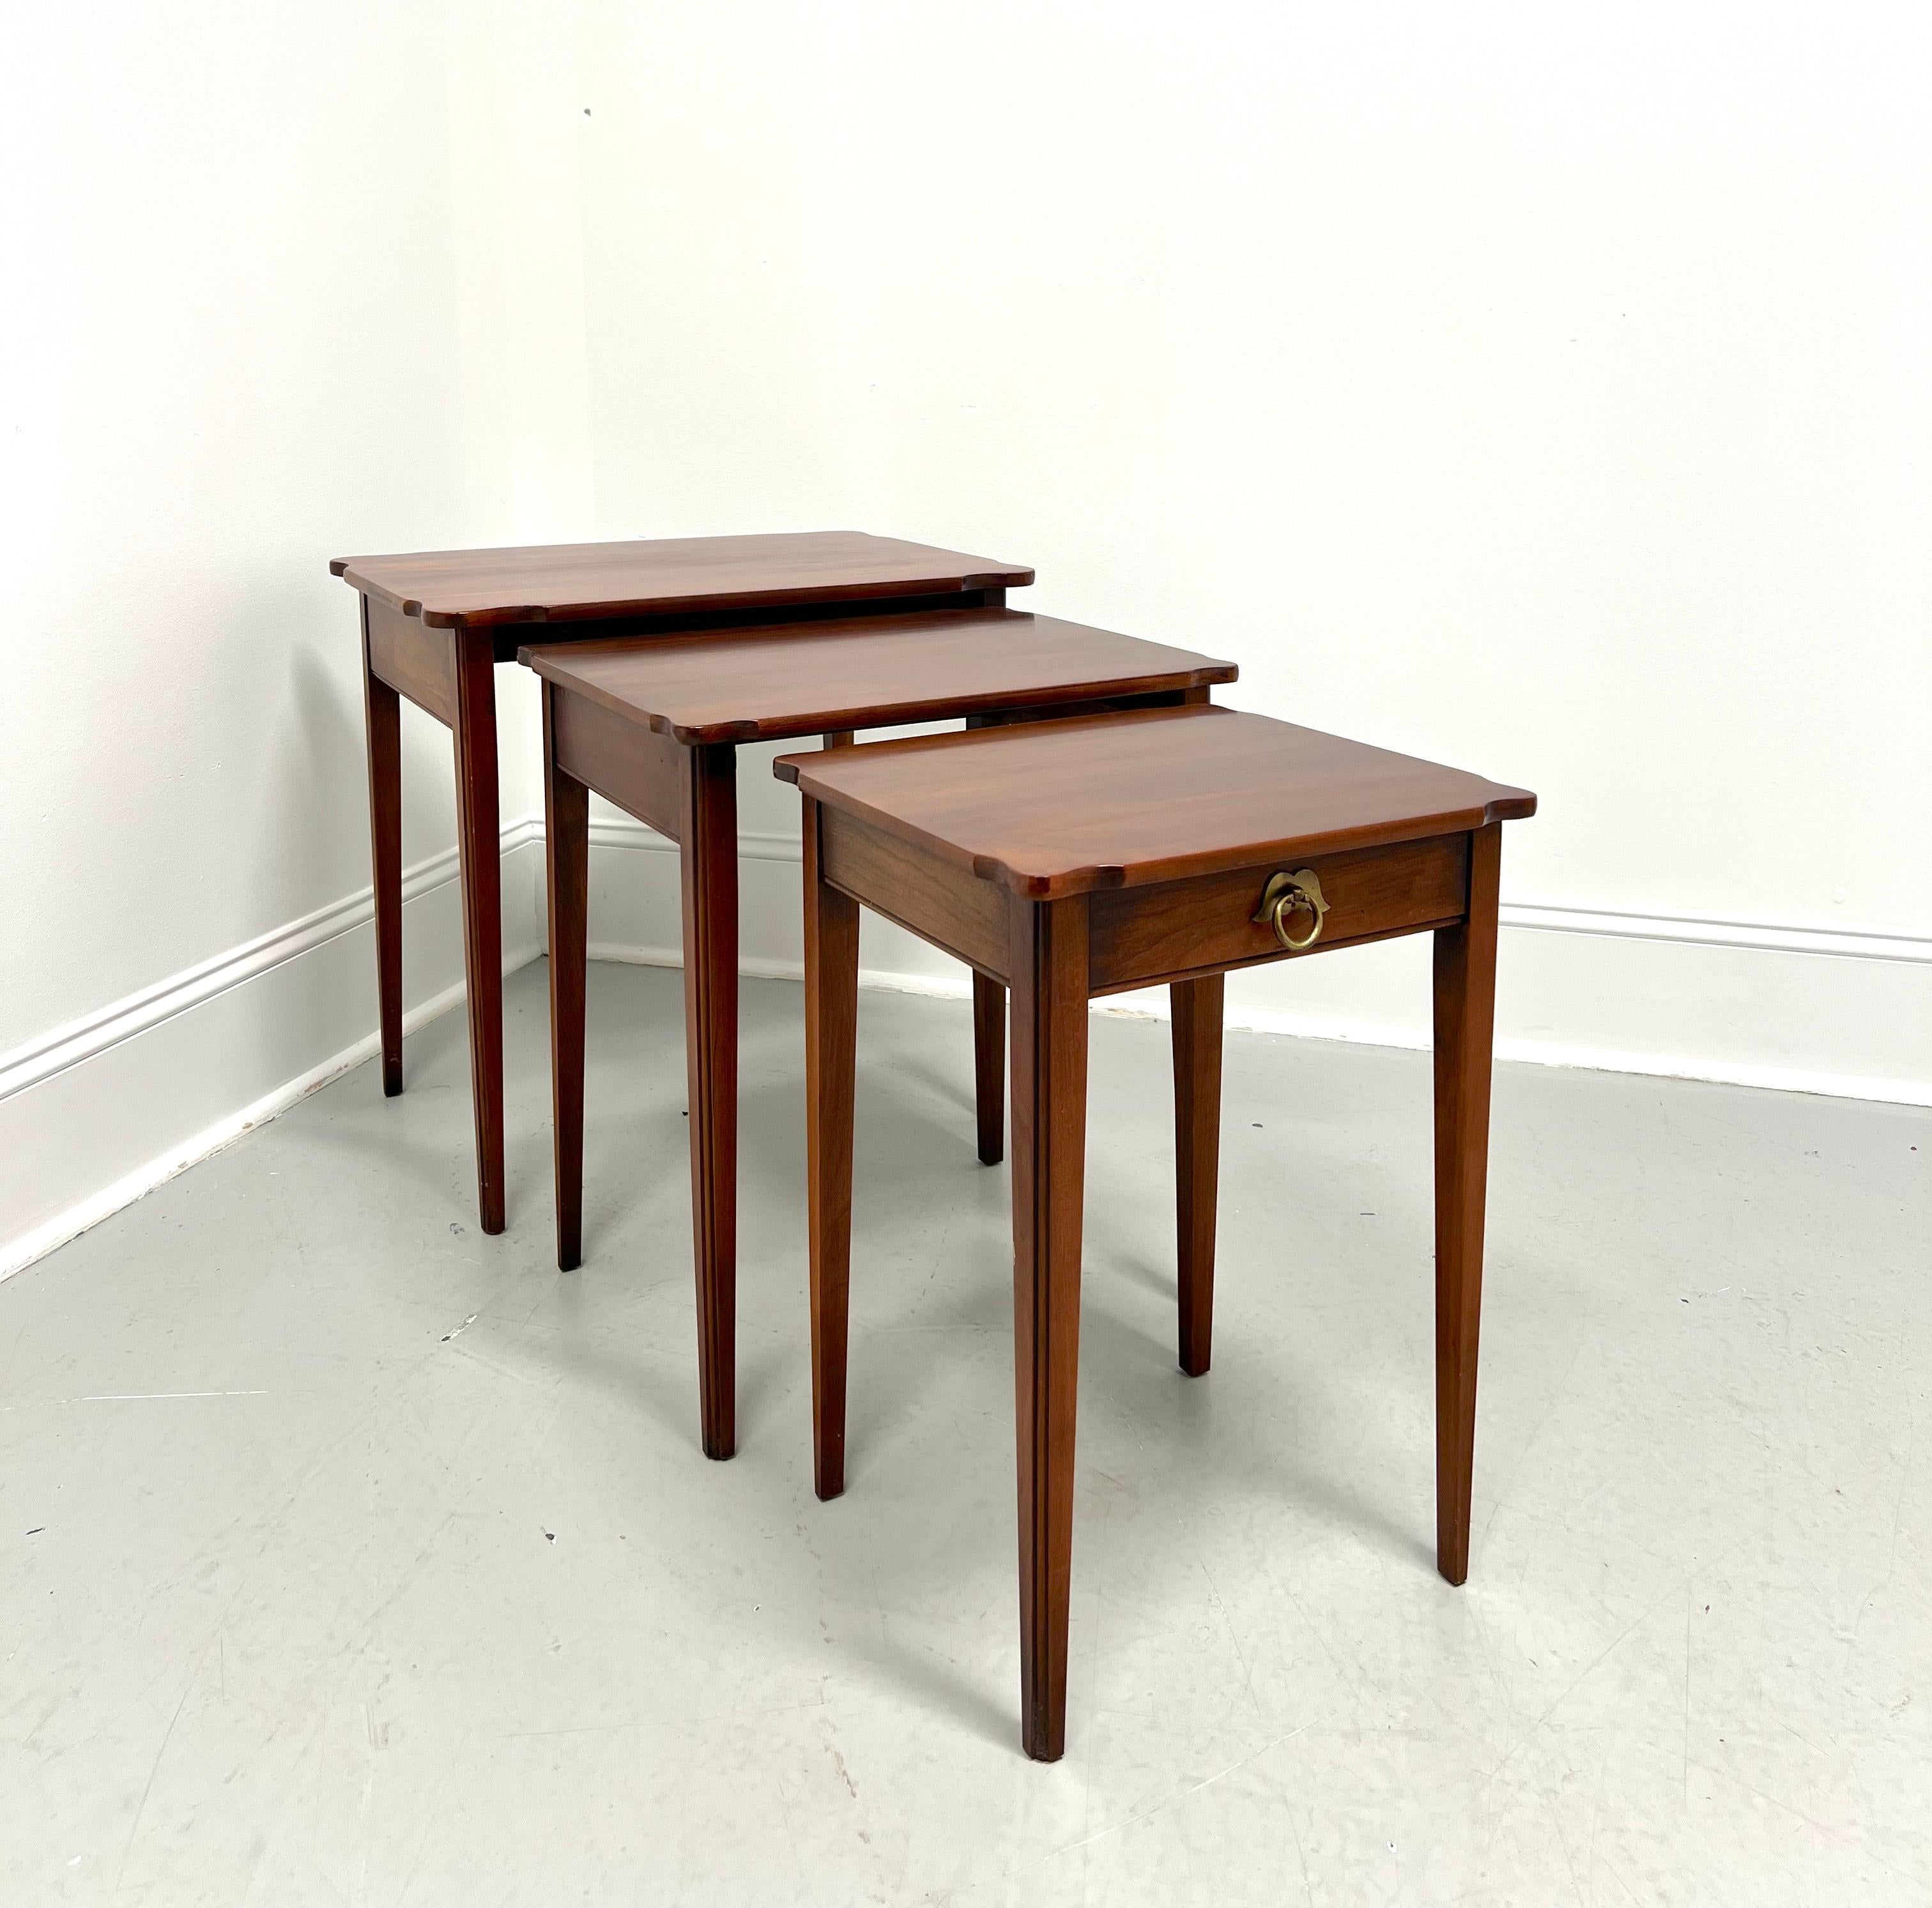 A set of three Chippendale style nesting tables by Statton Furniture. Solid cherry wood with their Centennial finish, serpentine shaped top with rounded corners & smooth edge, brass hardware, solid apron, and tapered straight legs with a fluted